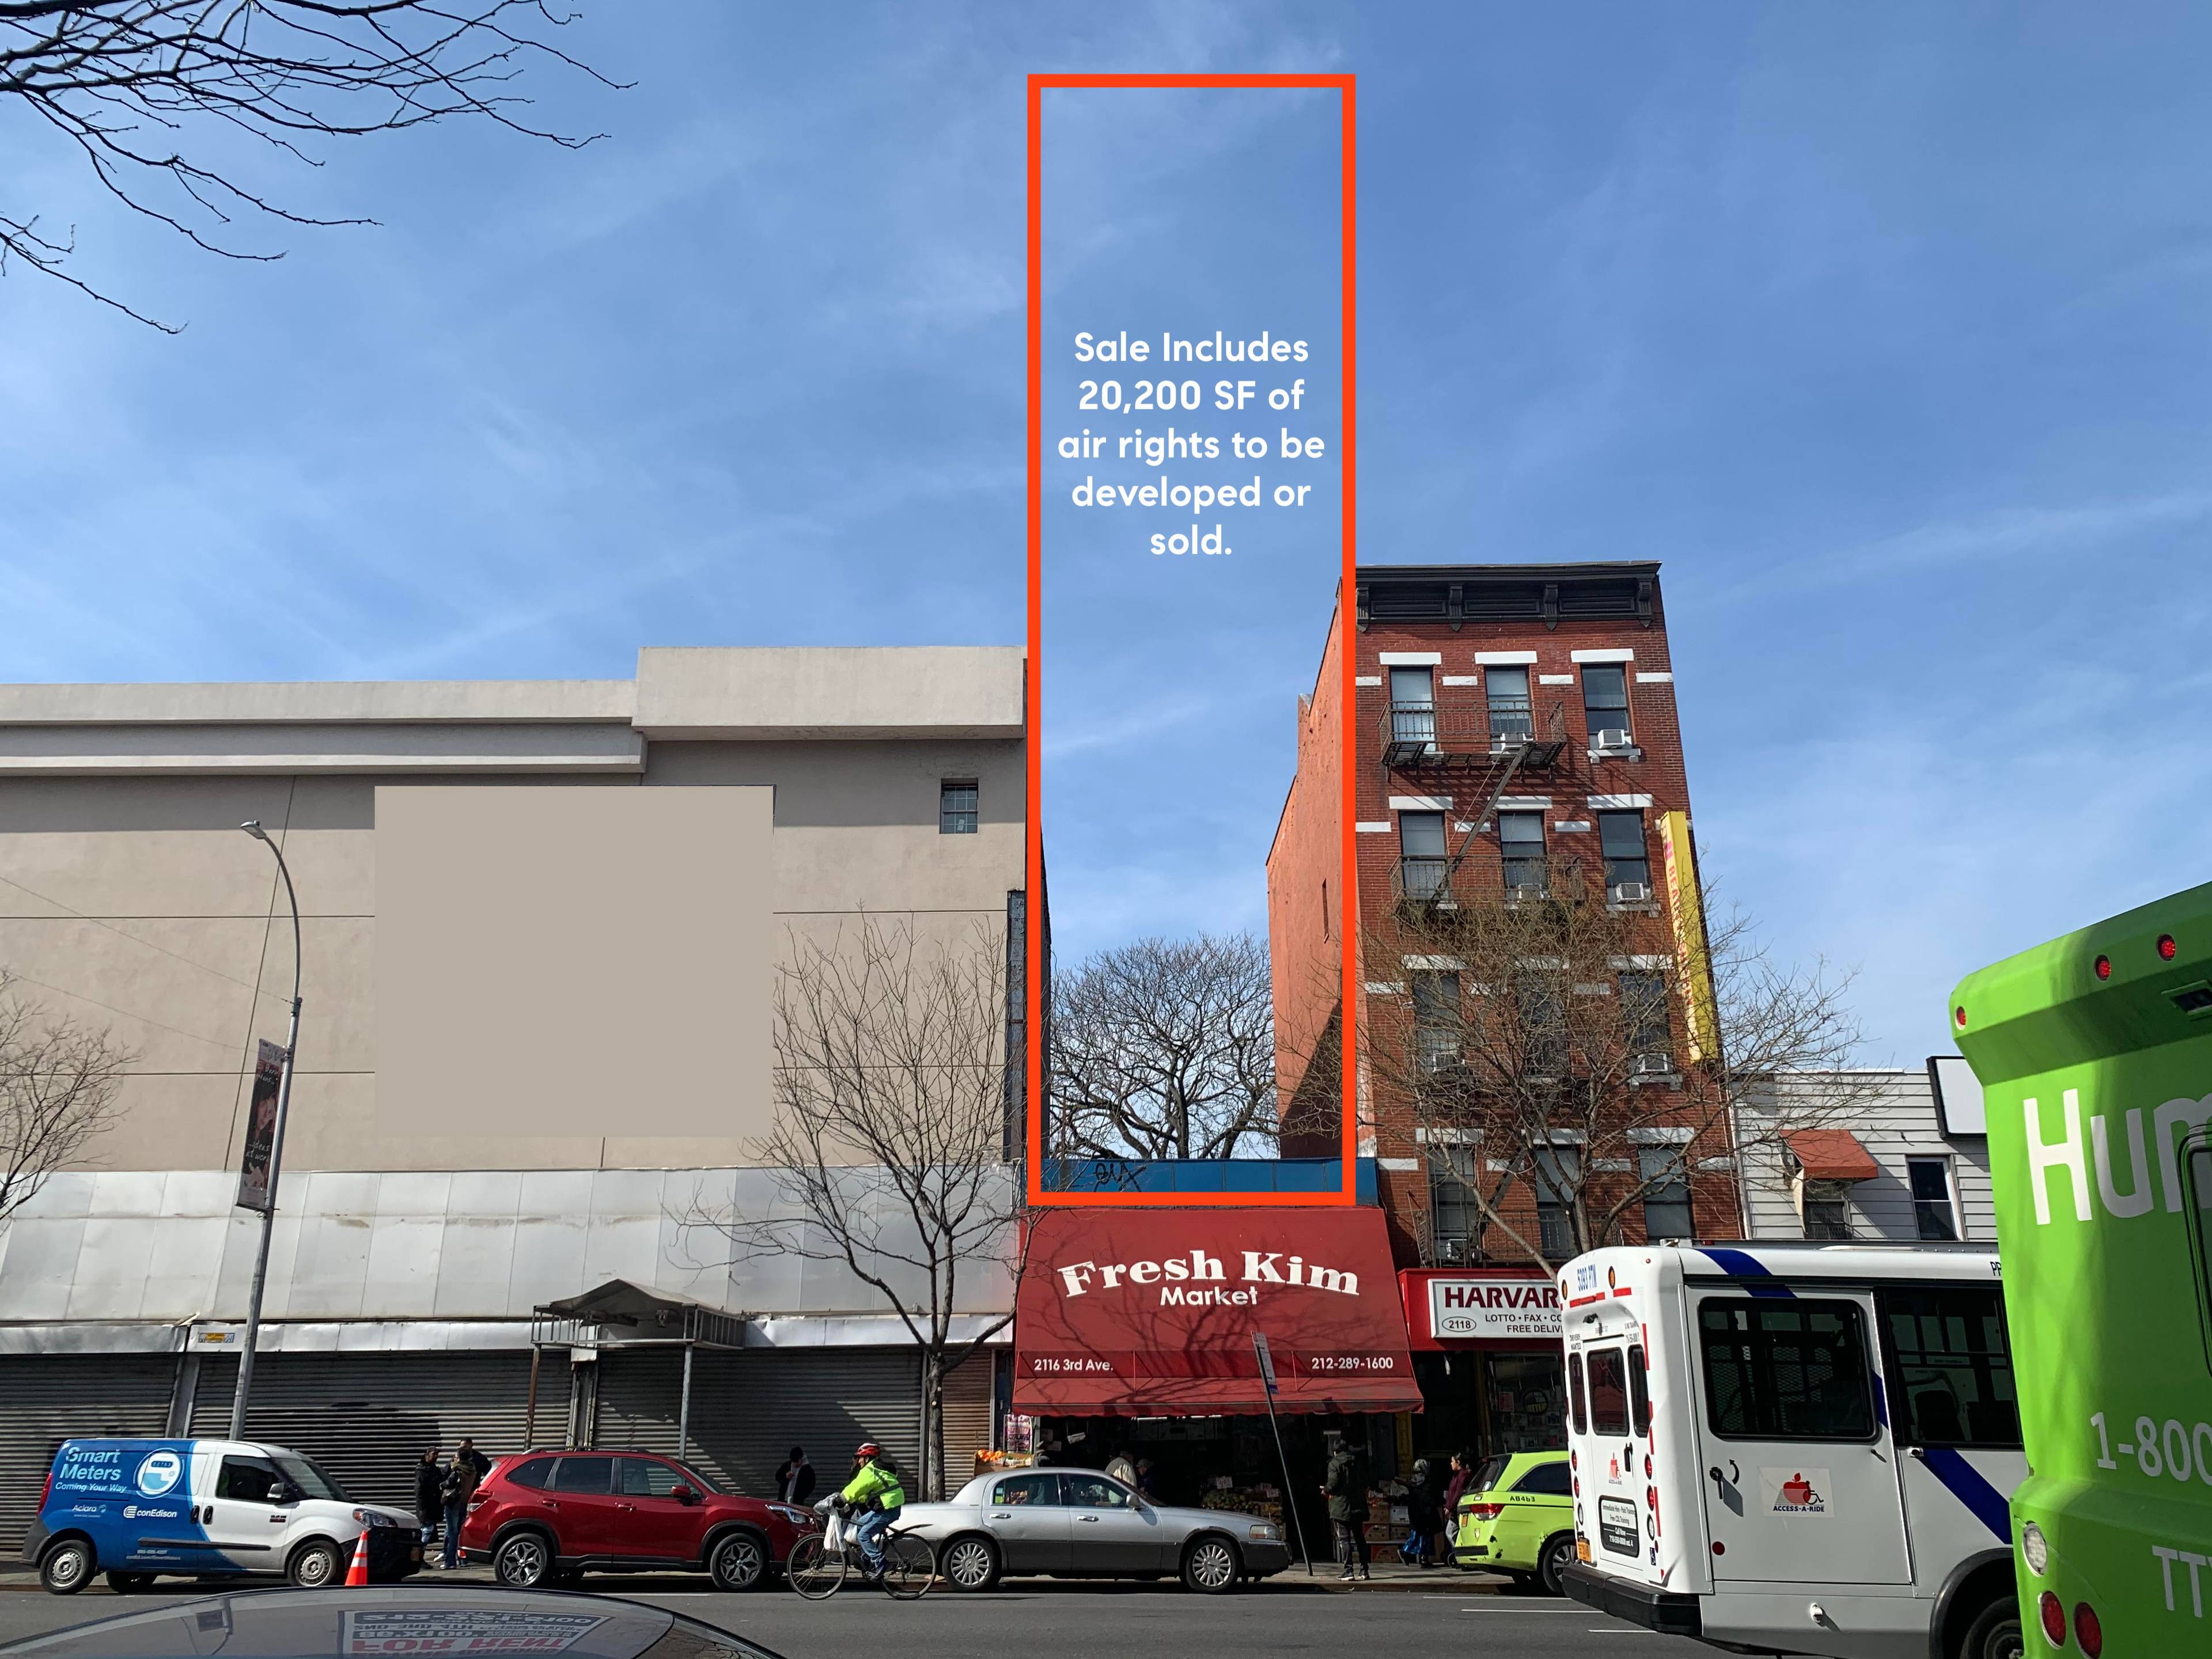 Presenting 2116 Third Avenue, a prime 1 one story retail building located on the west side of Third Avenue between 115th and 116th Streets in East Harlem.